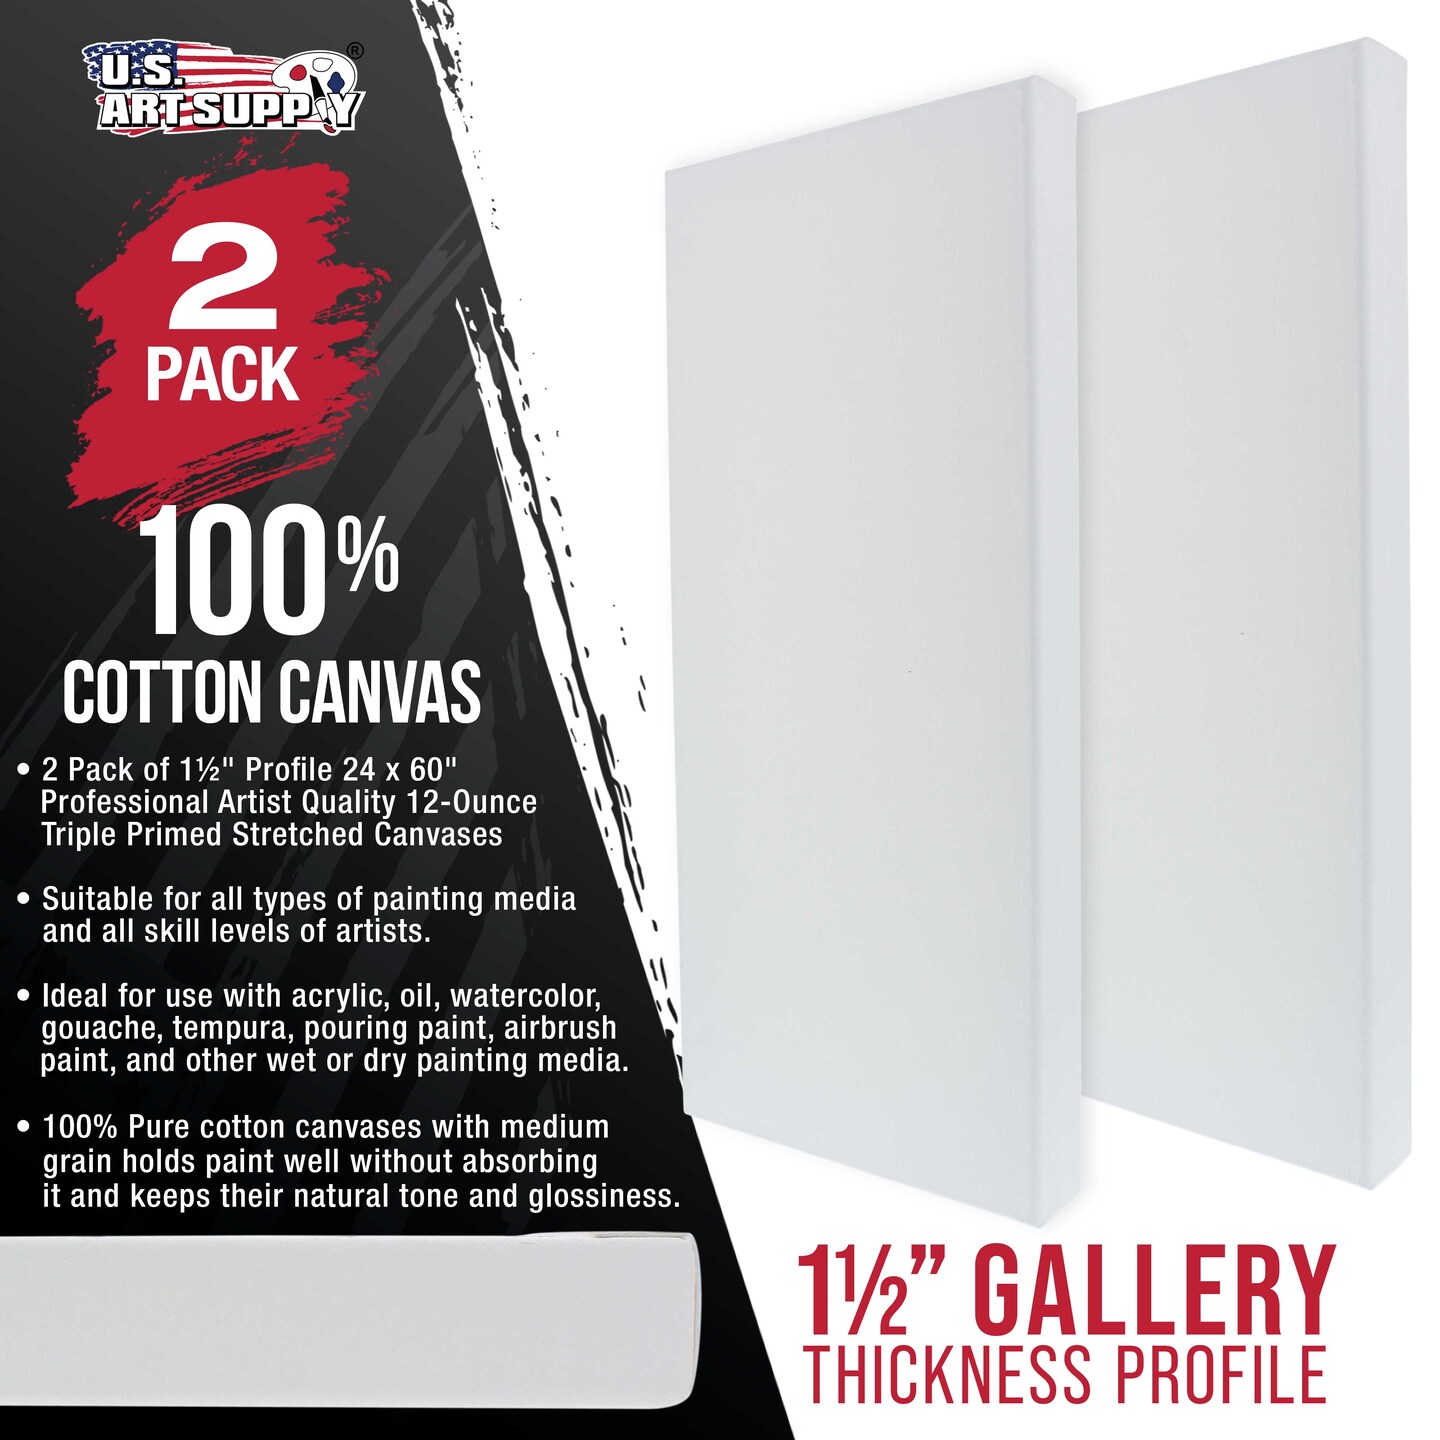 The Edge All Media Pro Stretched Cotton Canvas, 30x72 - 1-1/2 Deep (Box  of 3)